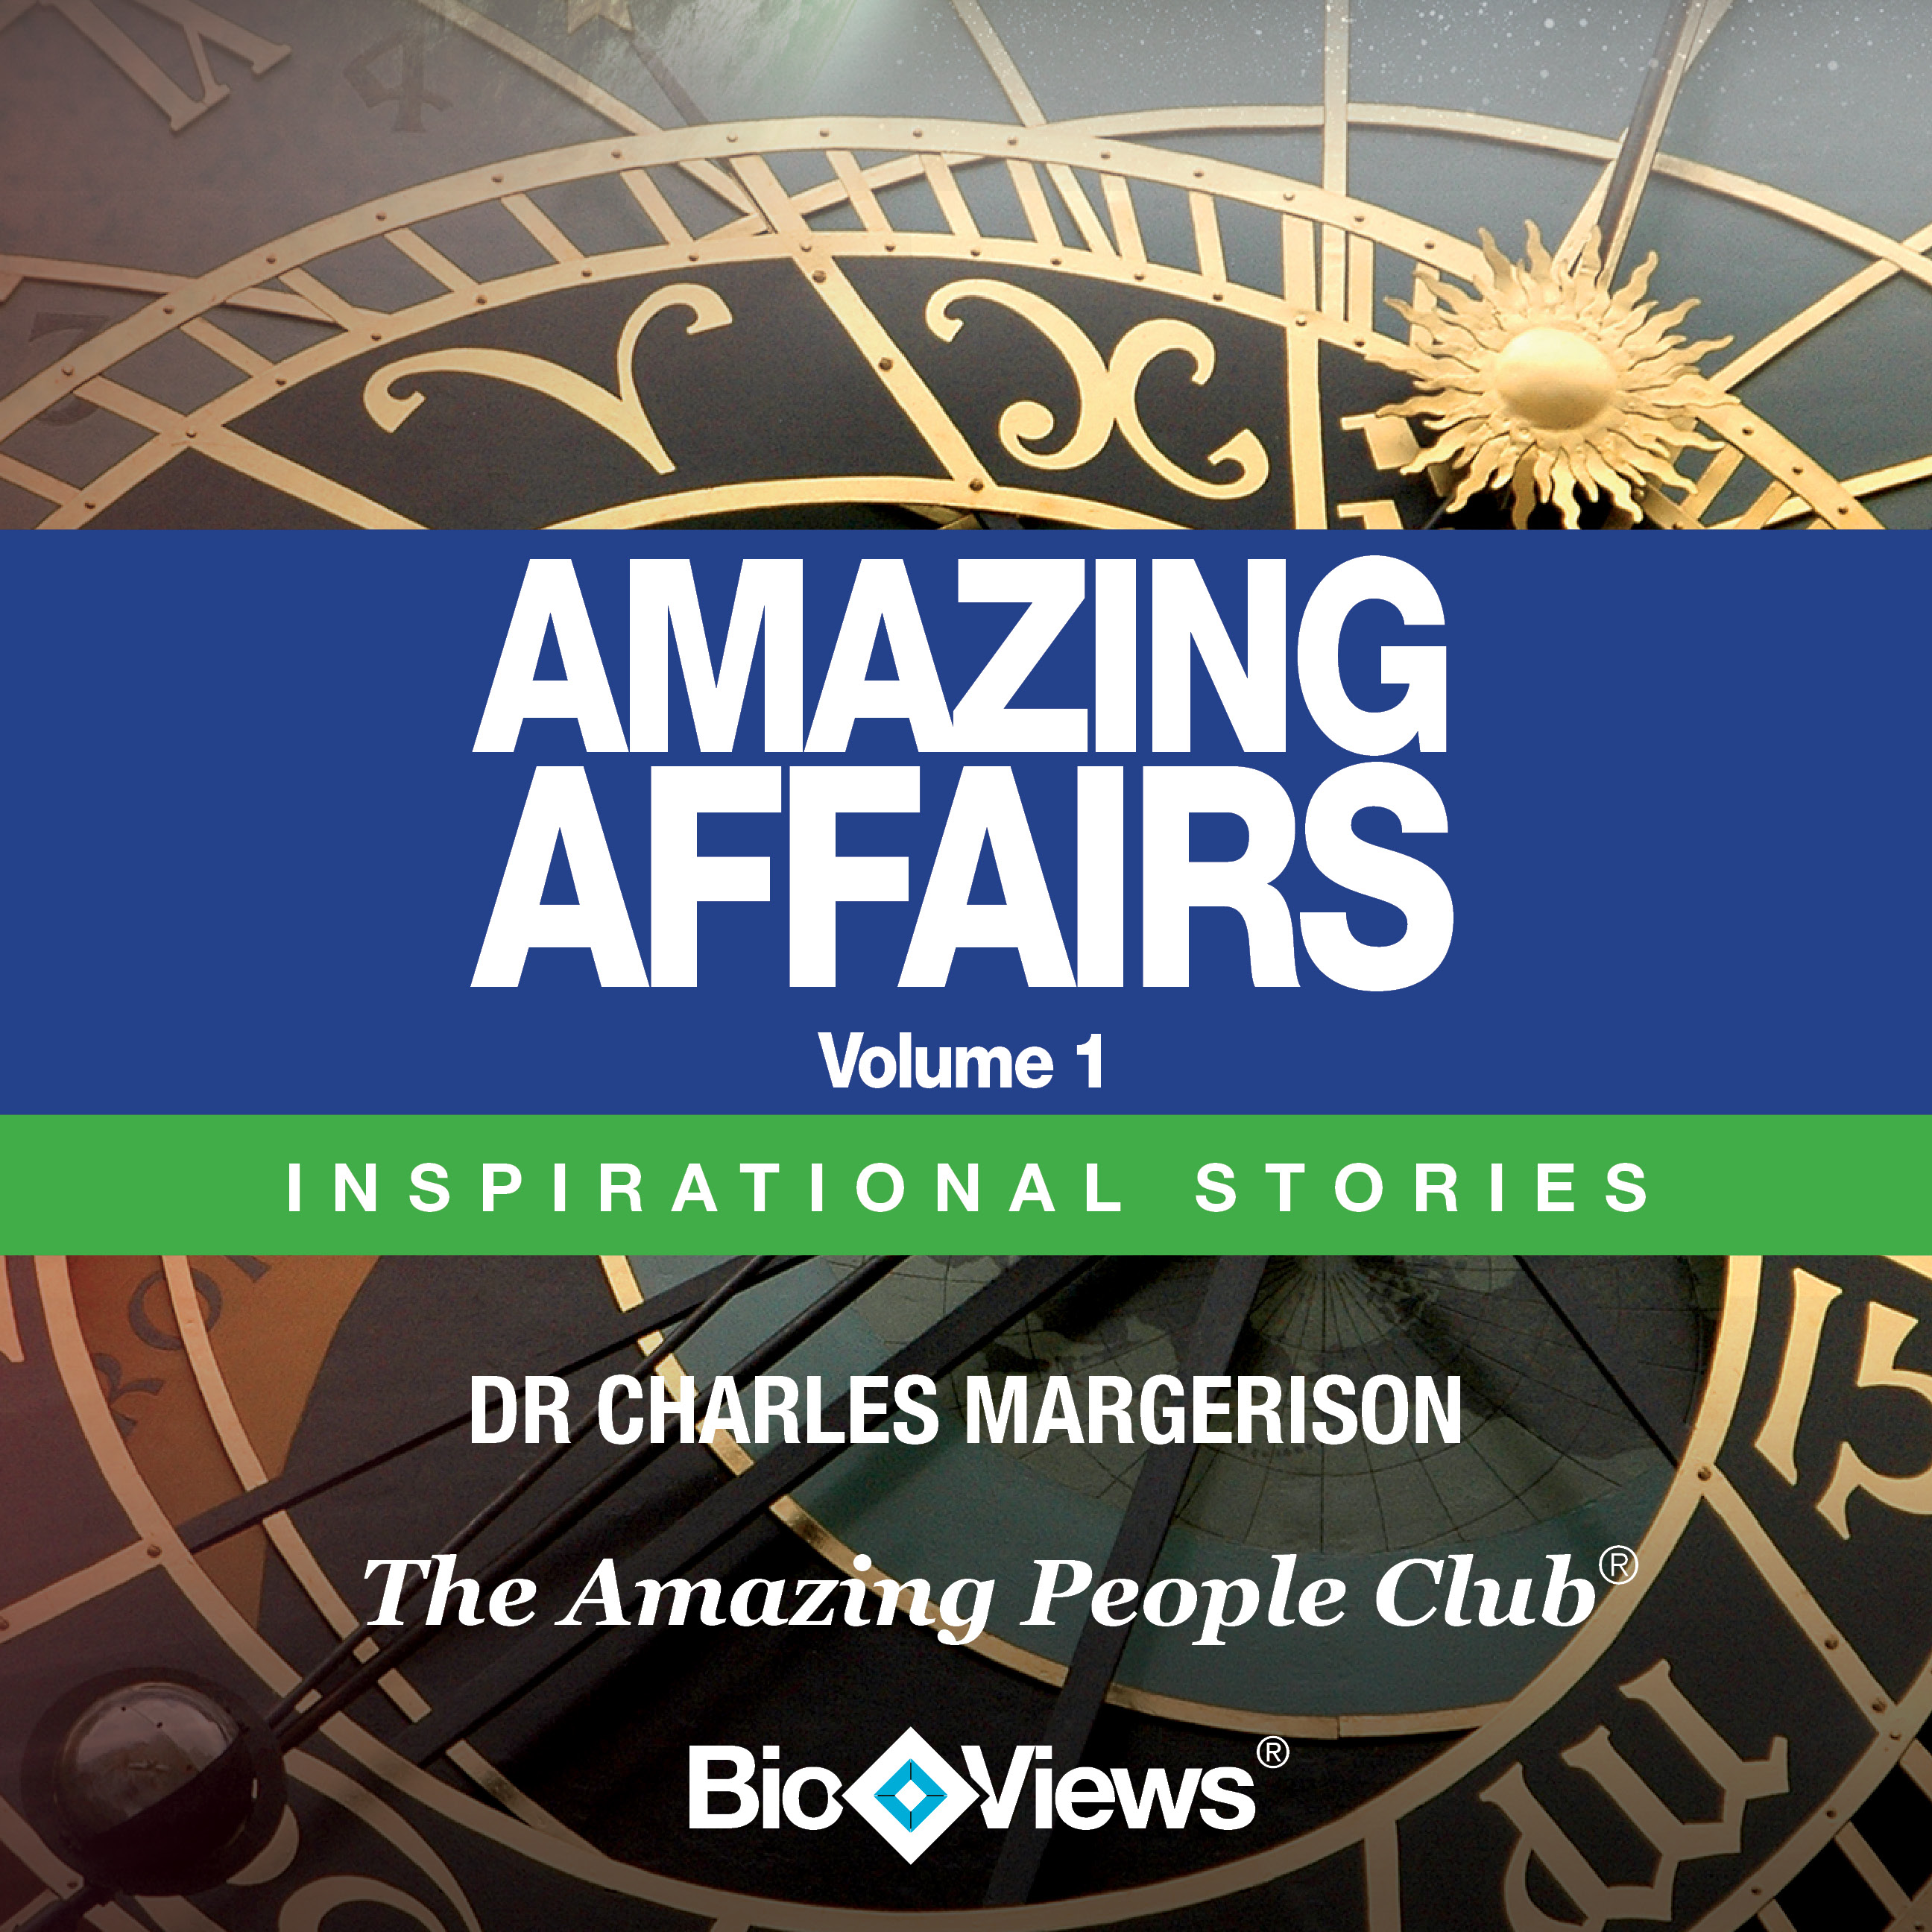 Amazing Affairs, Vol. 1: Inspirational Stories Audiobook, by Charles Margerison